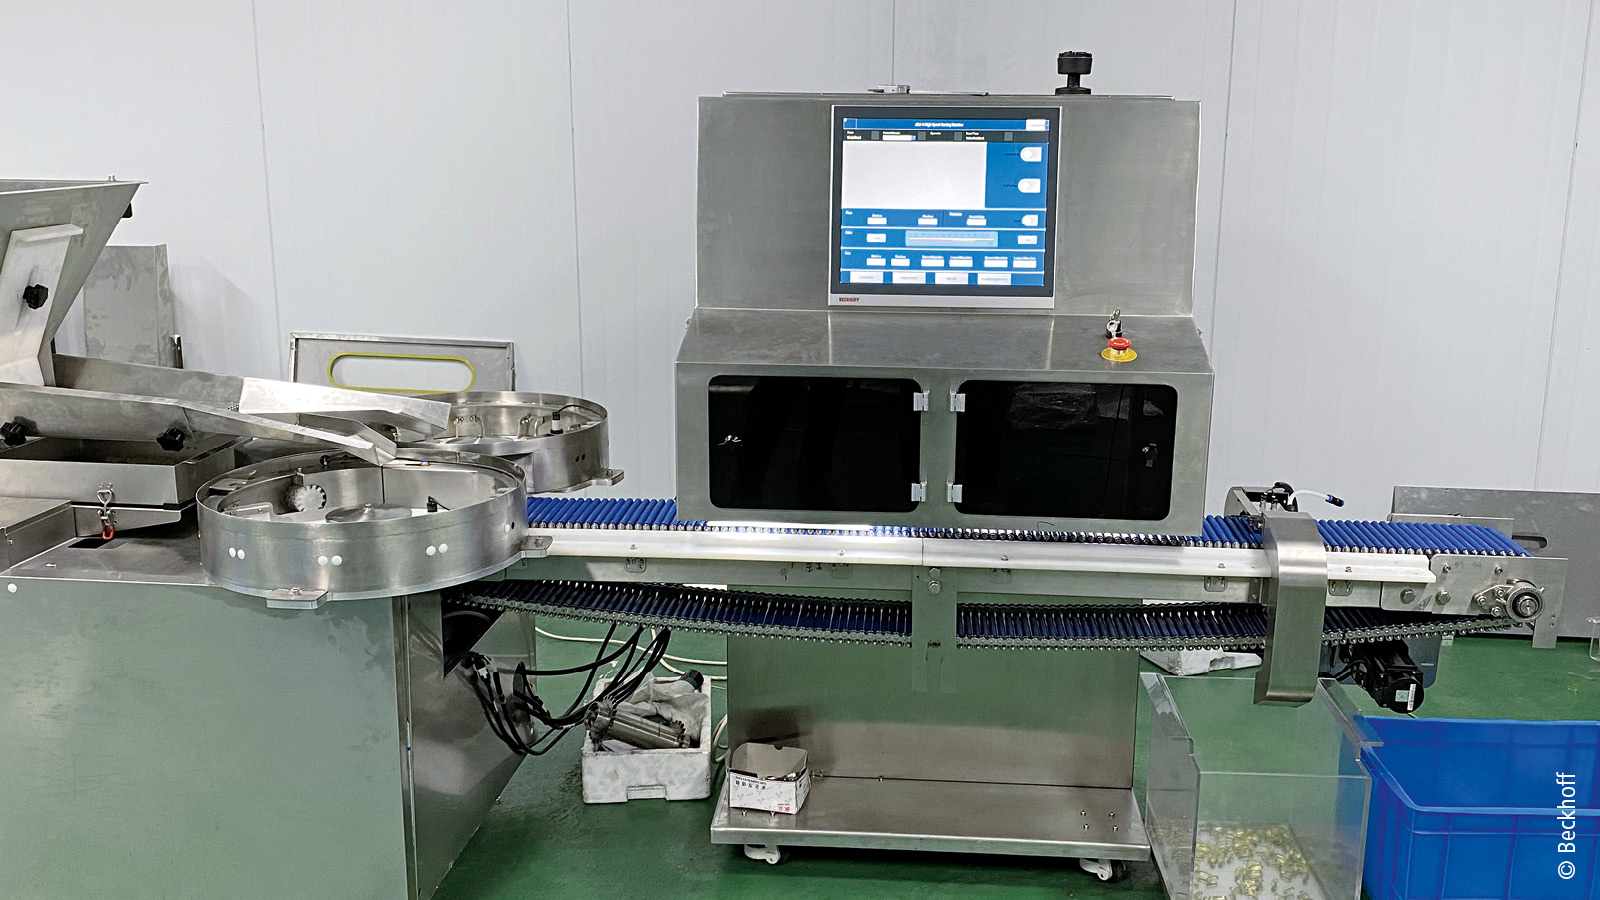   Highly integrated soft capsule inspection machine implemented with TwinCAT Vision and TwinCAT HMI. 